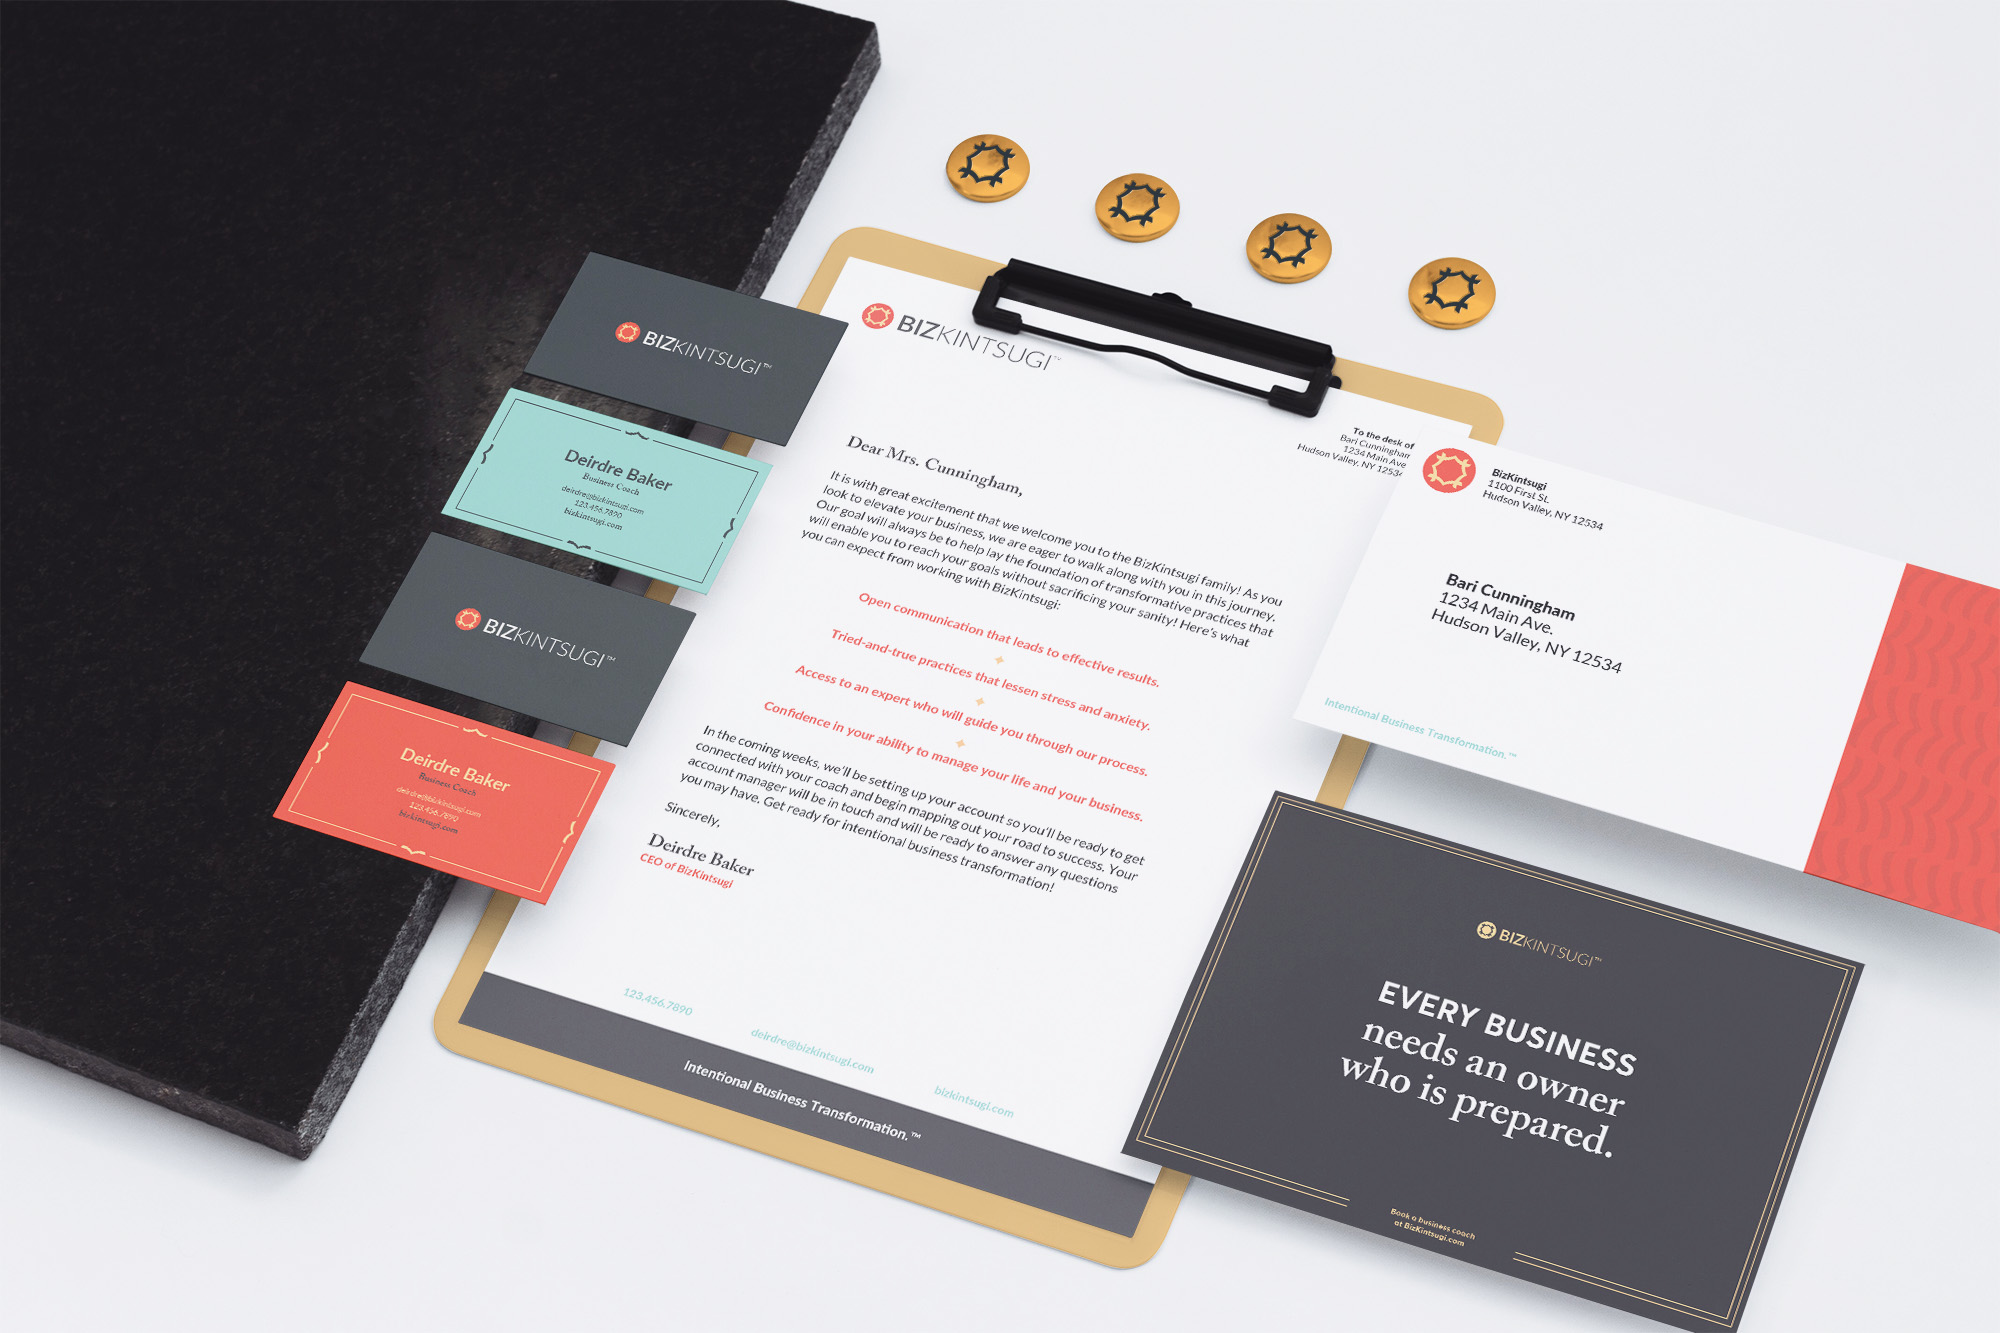 Stationery designs, including letterhead, business cards, and envelope